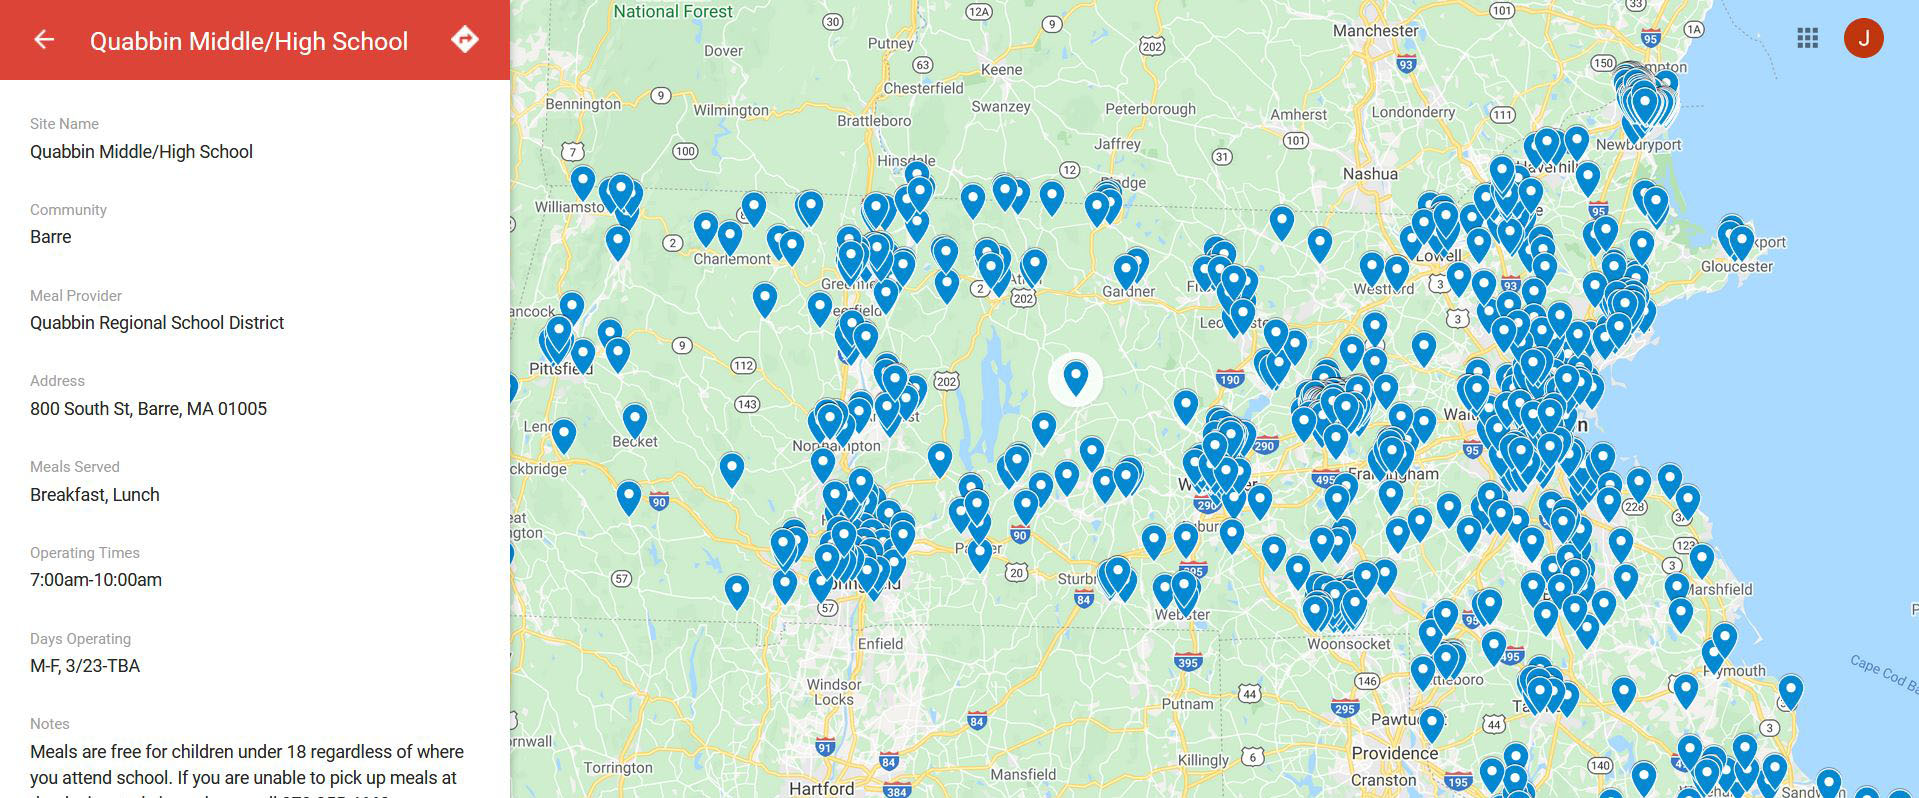 Project Bread - MA Meal Sites During School Closures Map 